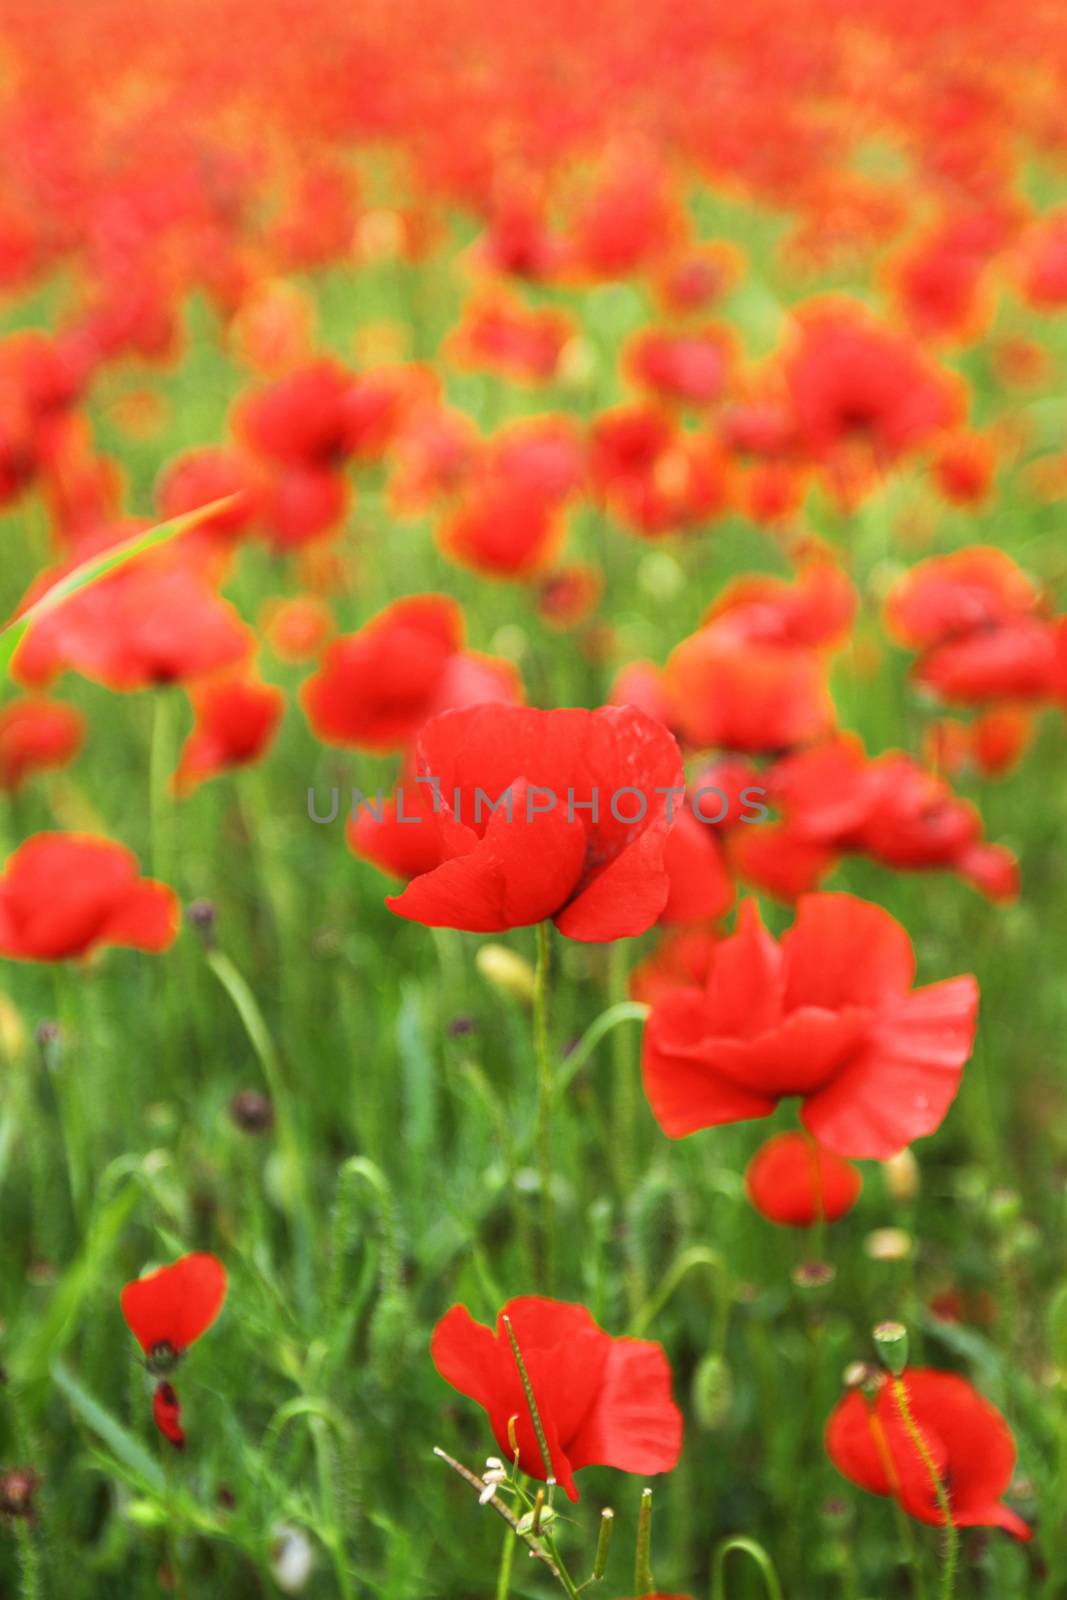 Field of red poppies close up view